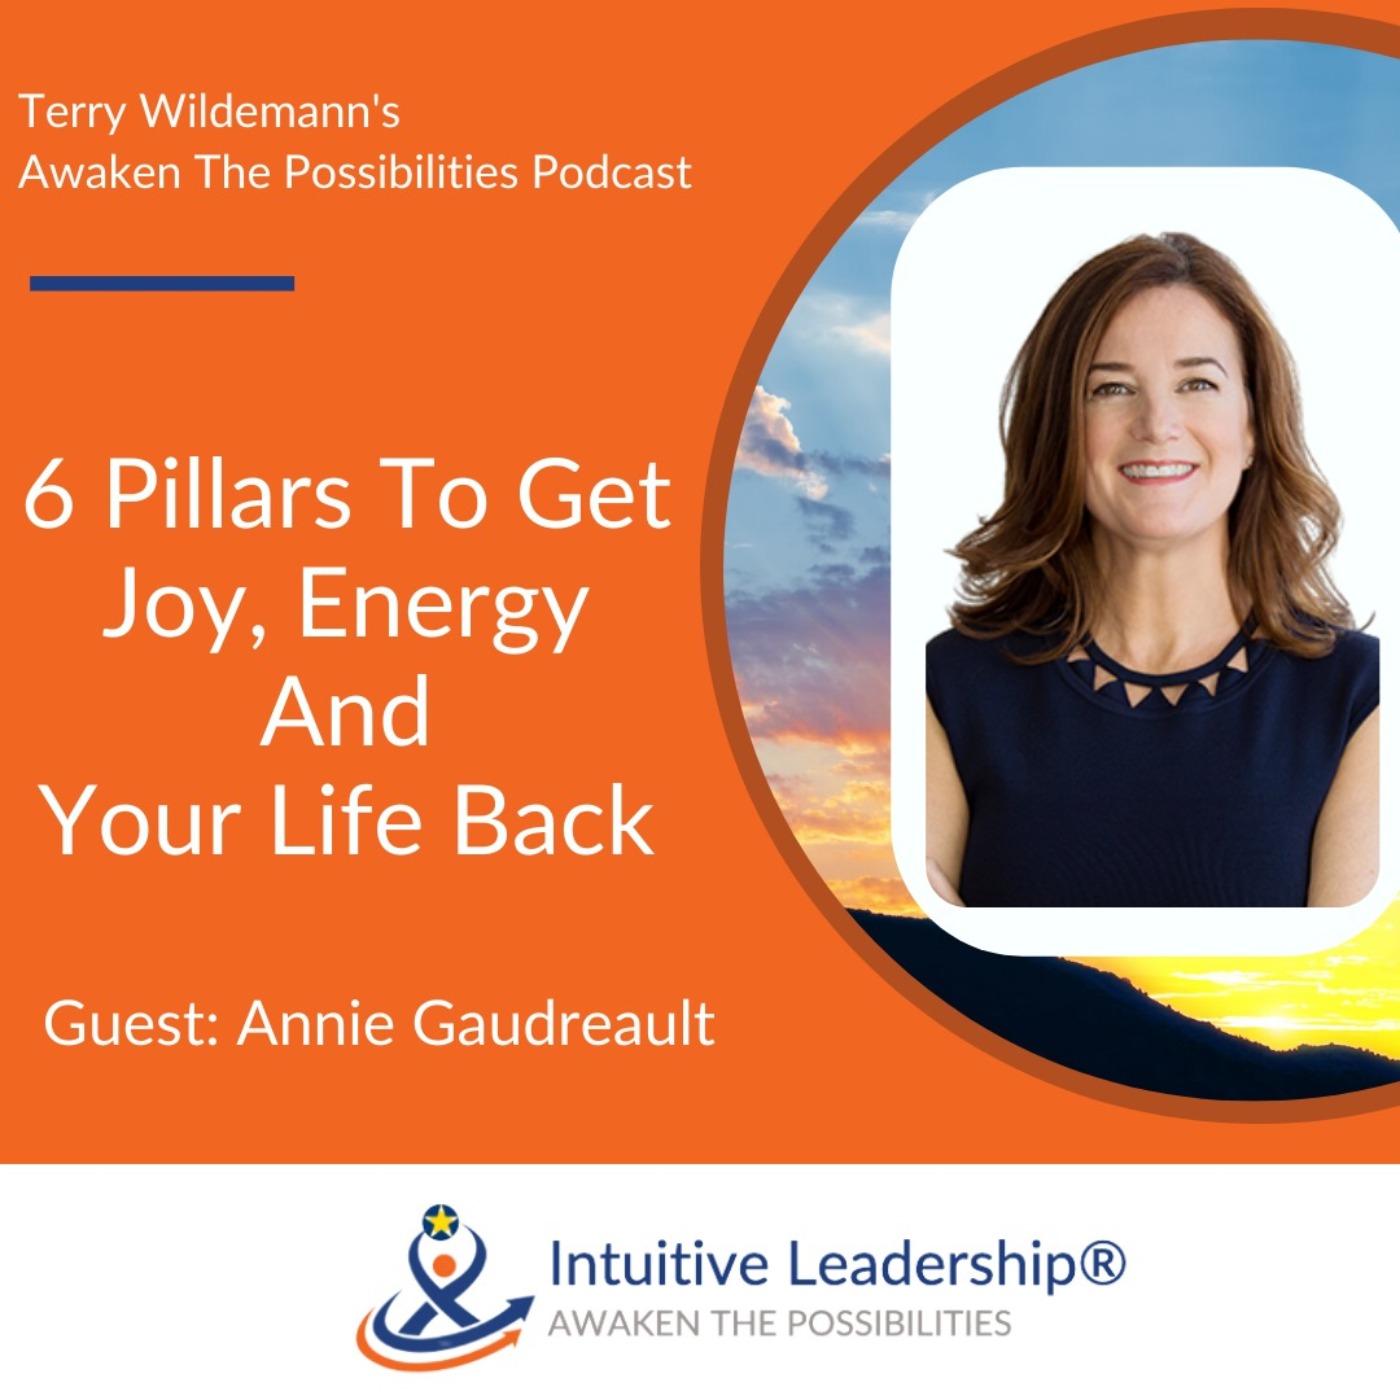 6 Pillars To Get Joy, Energy And Your Life Back